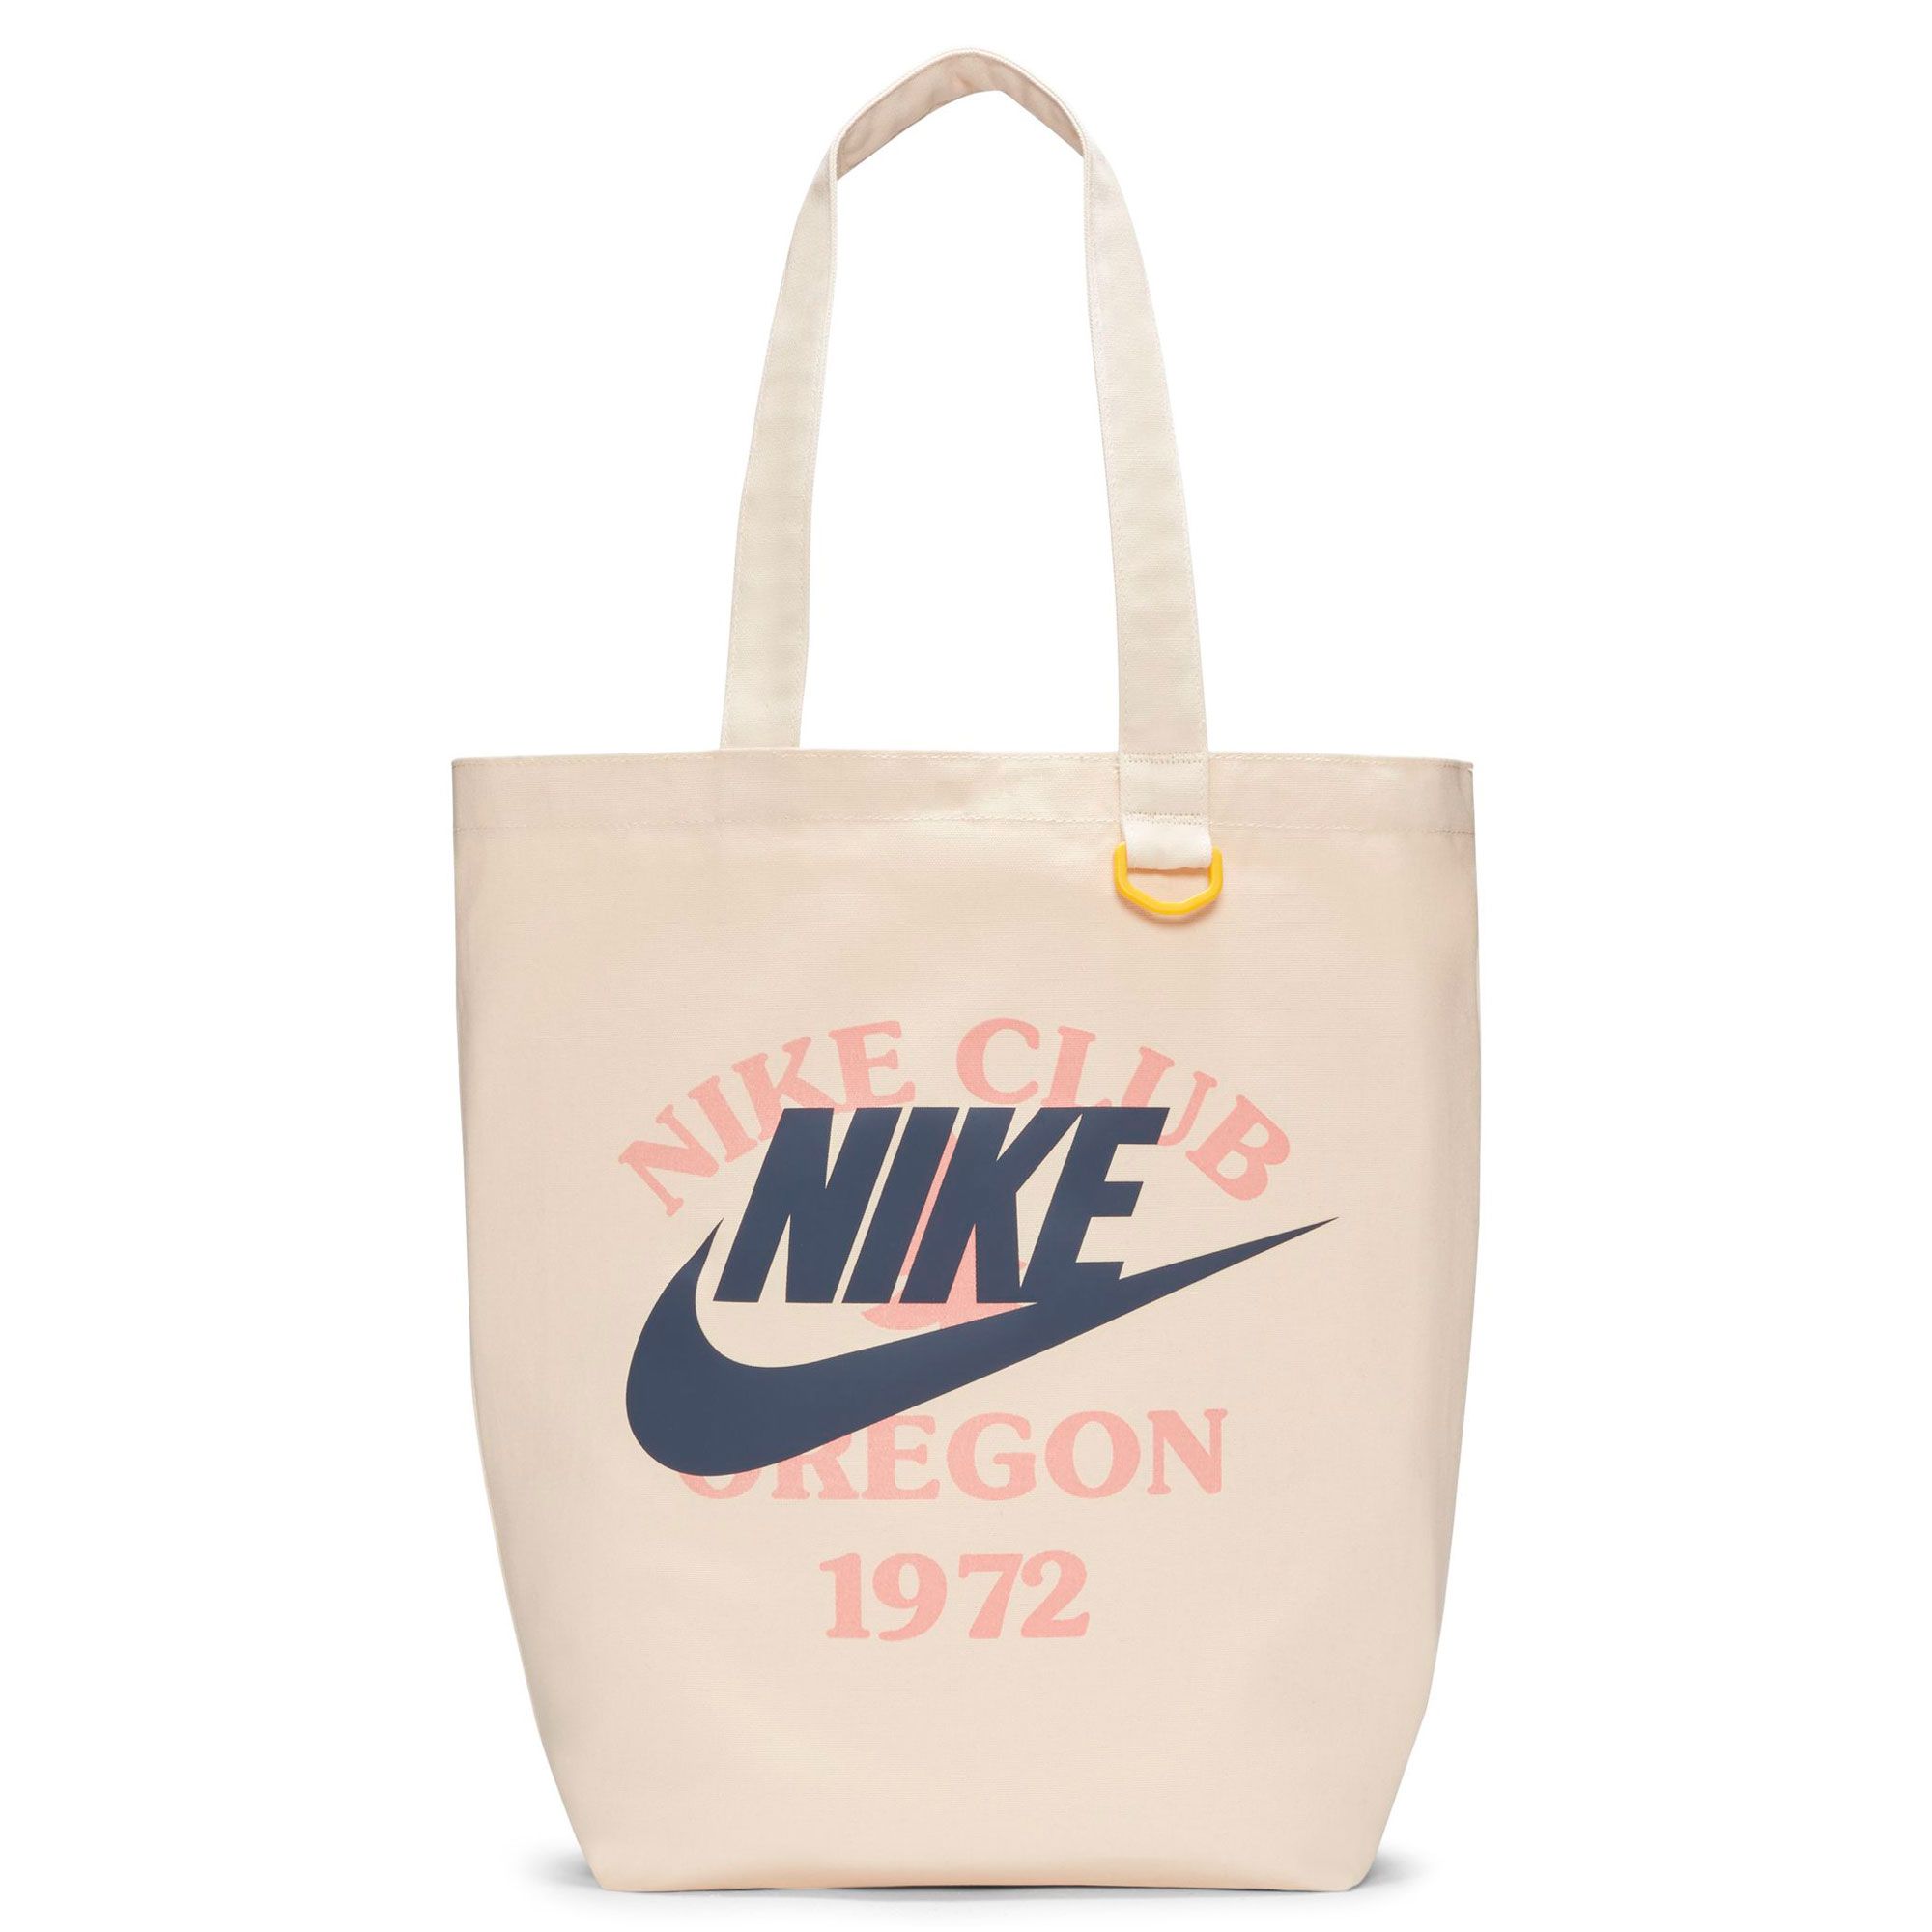 Nike Canvas Tote Bag Los Angeles Running” NEW